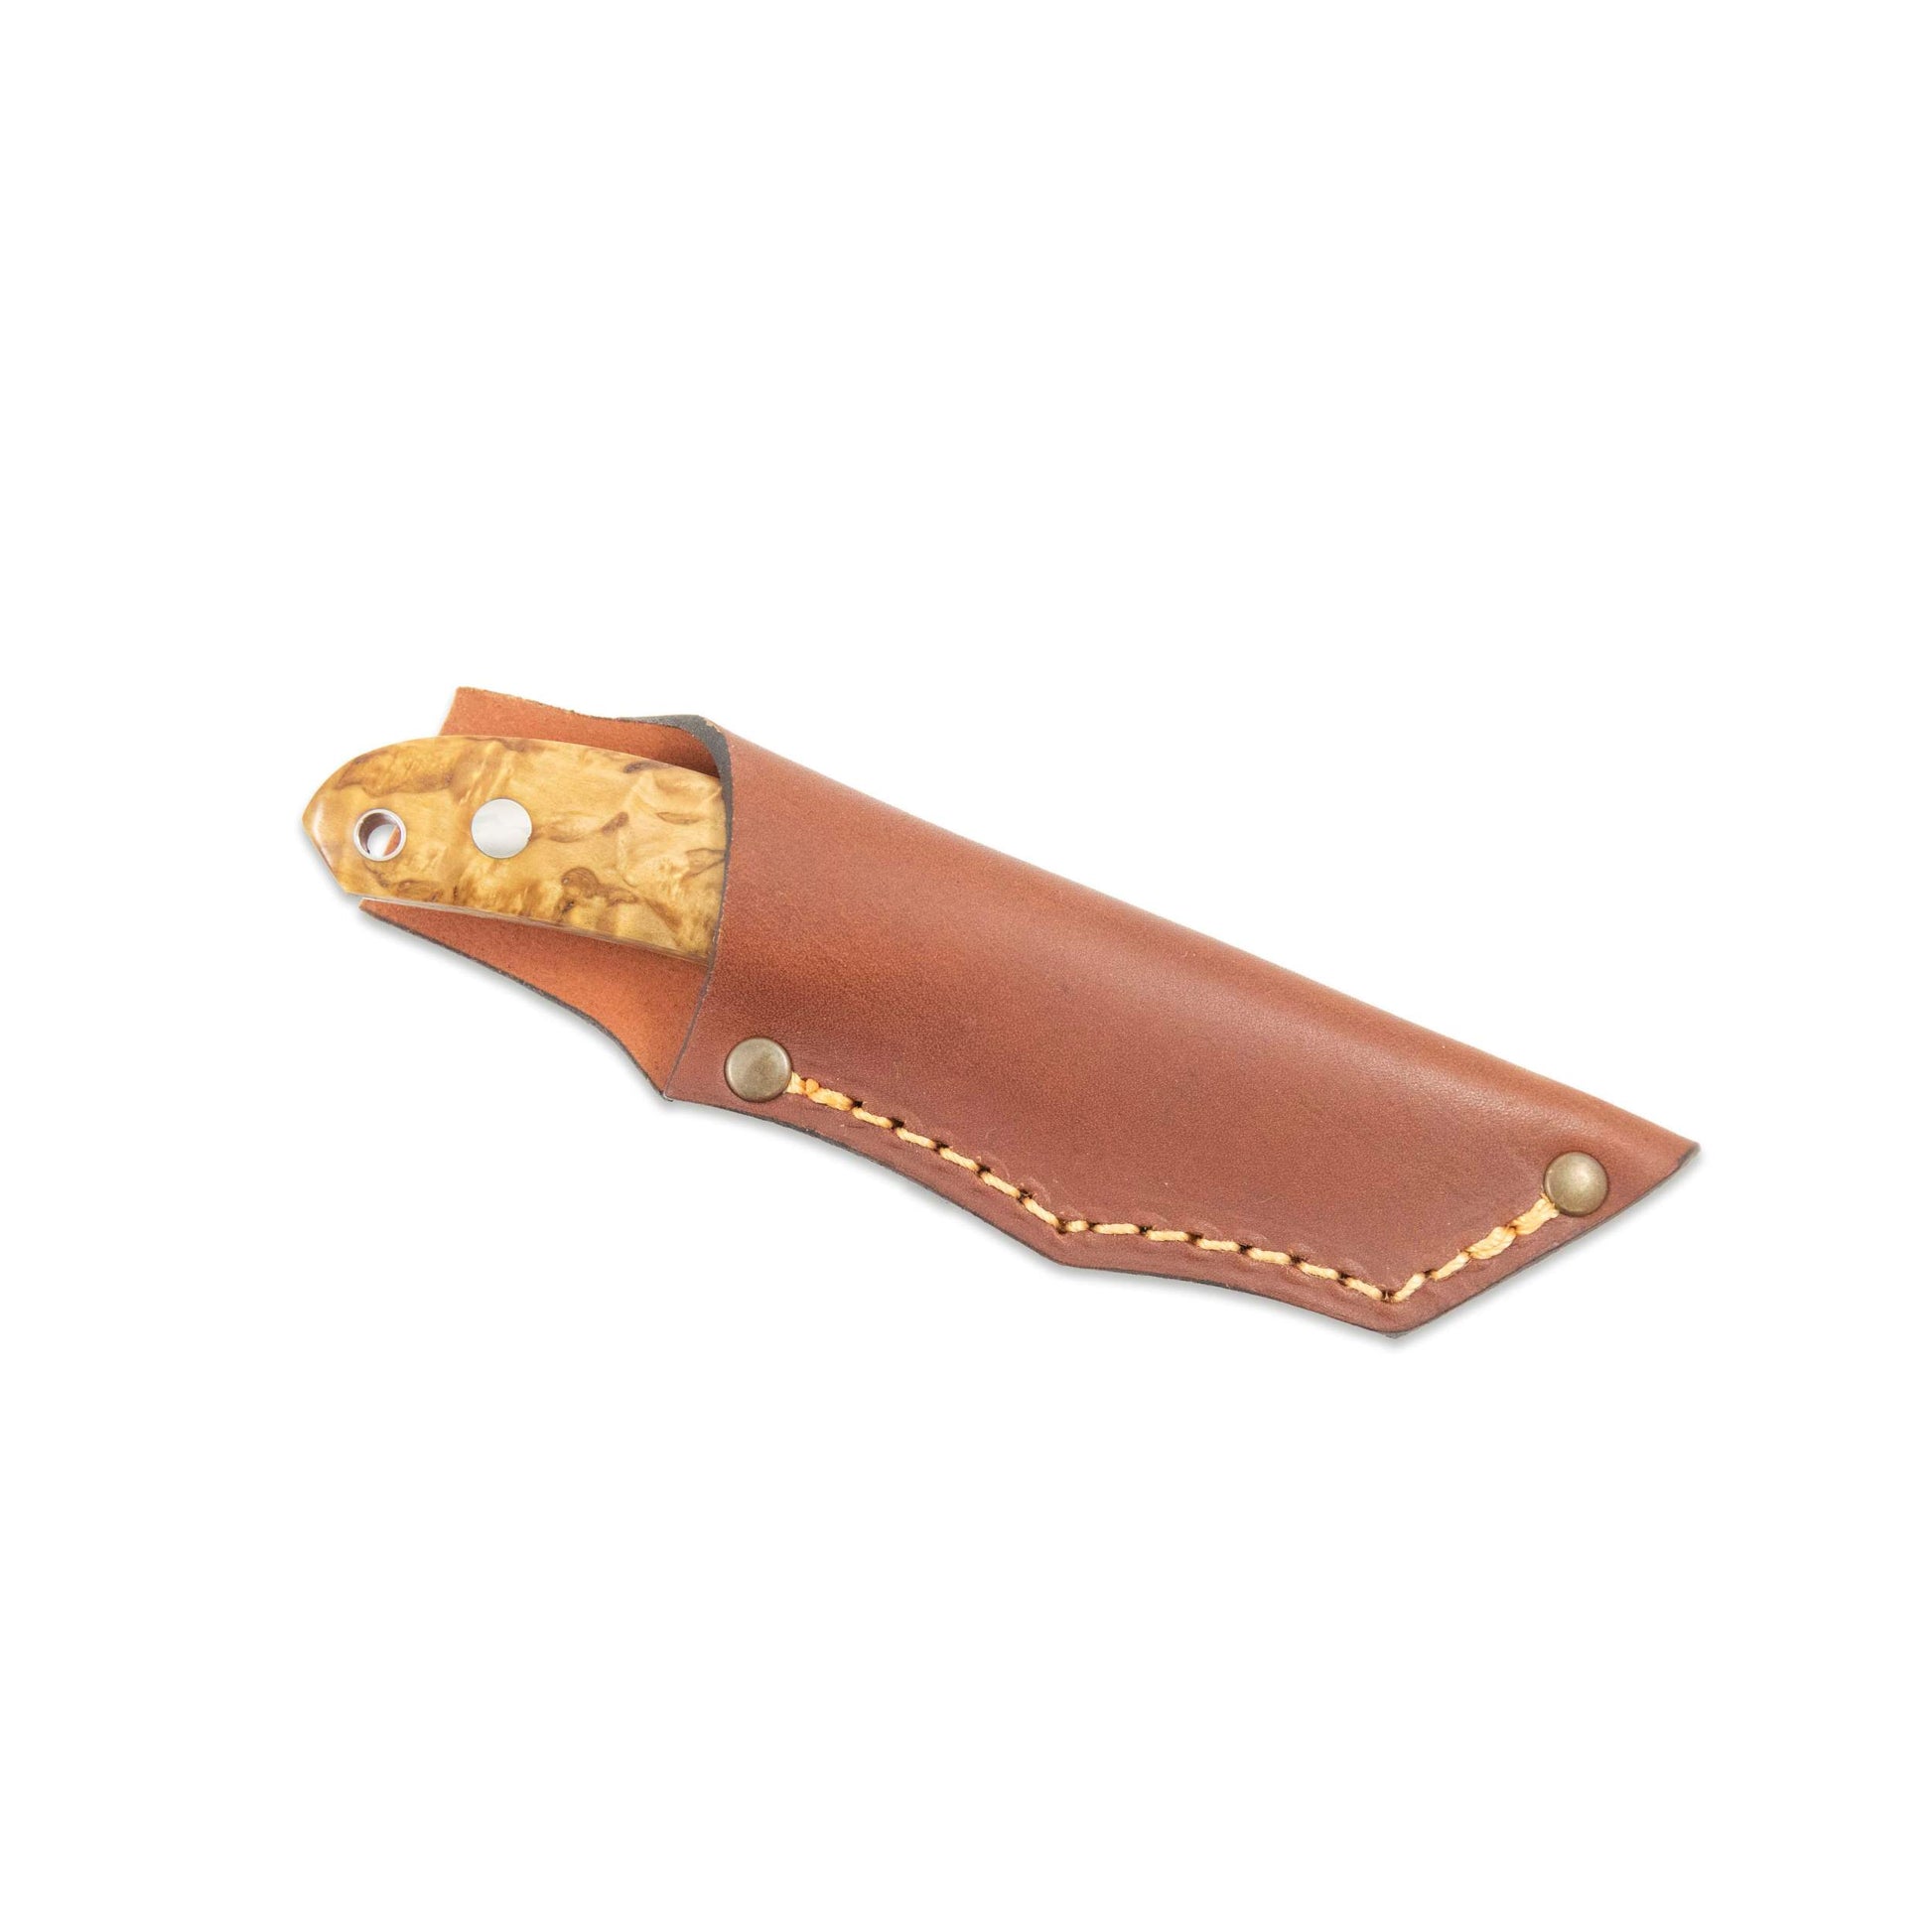 Casström Safari belt knife with curly birch handle and sheathed in a cognac brown leather sheath